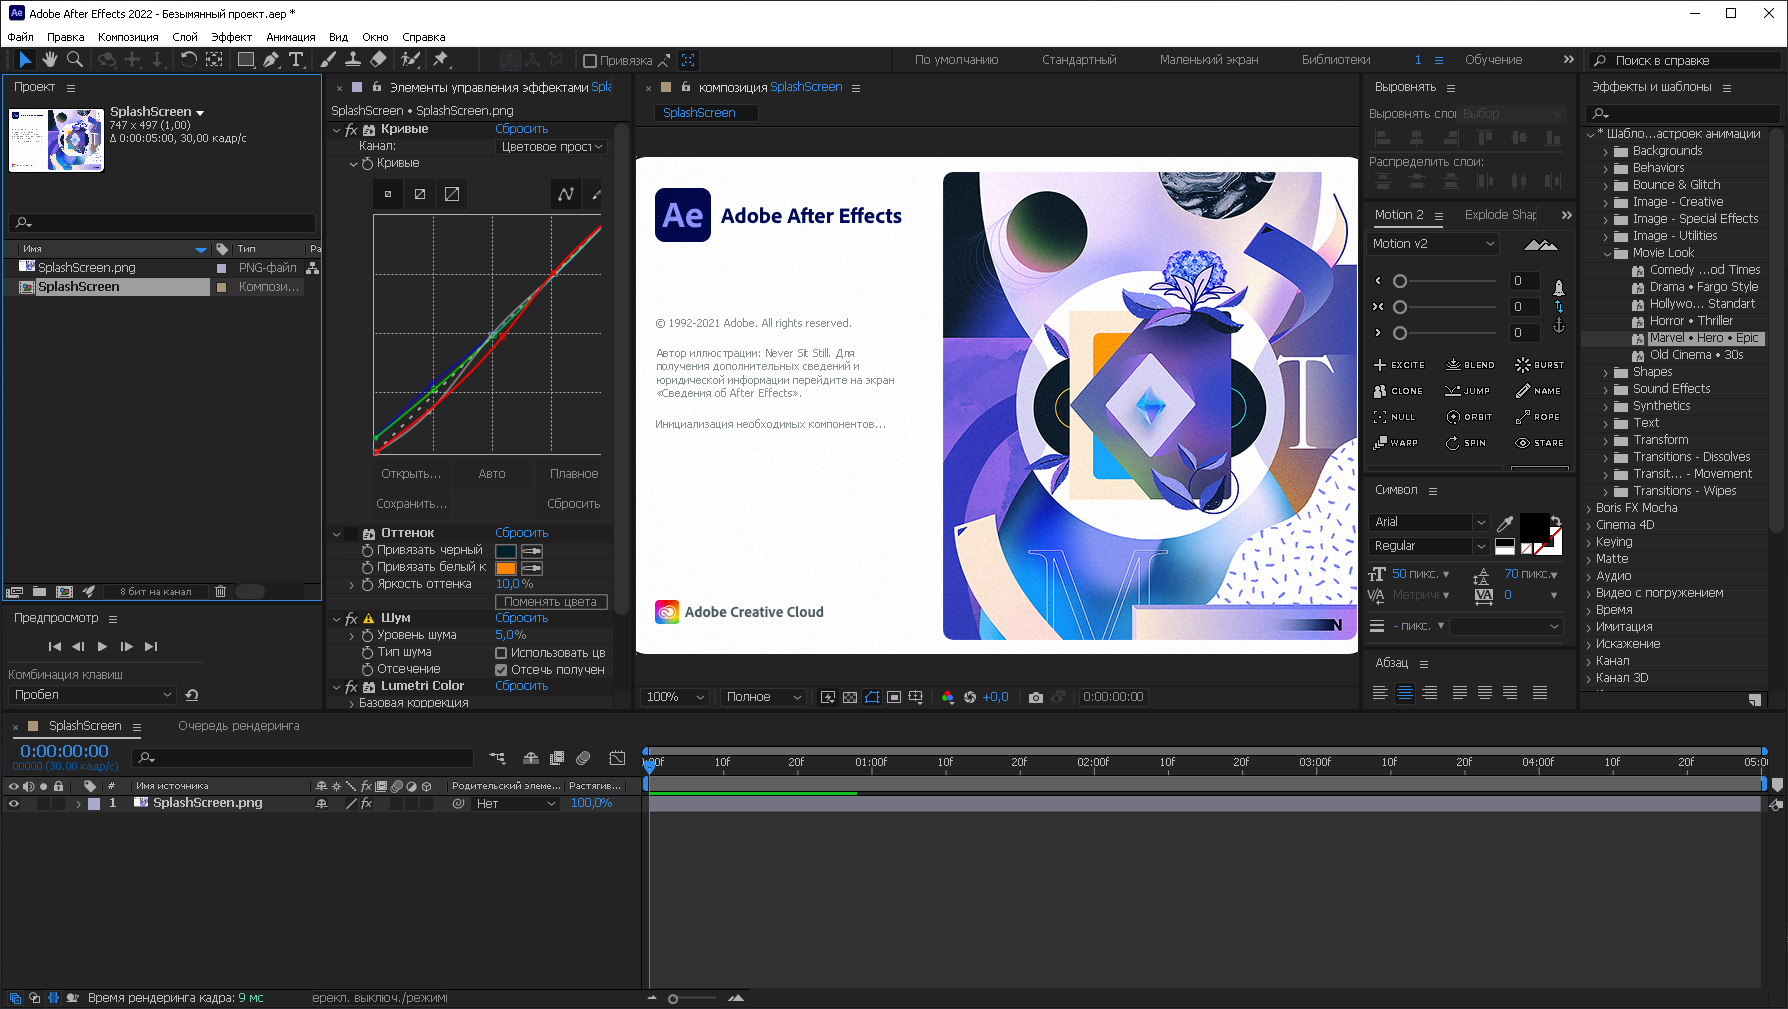 After effects работа. Афтер эффект 2022. Adobe after Effects. Программа Афтер эффект. Adobe after Effects 2021.